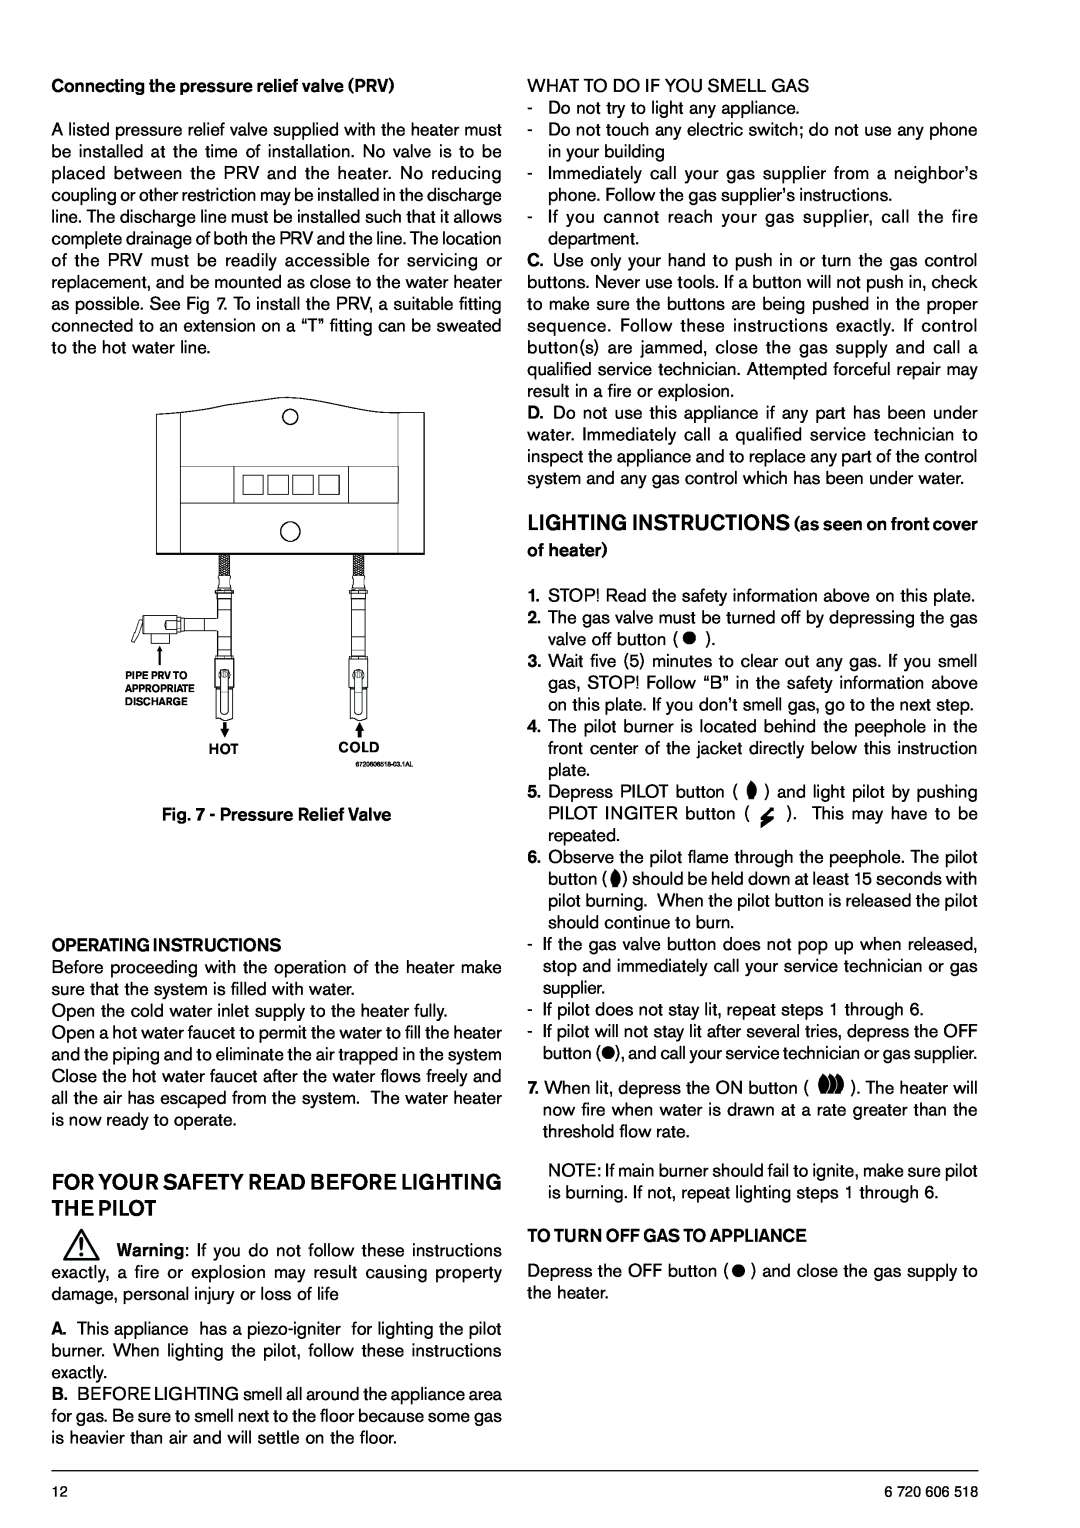 Bosch Appliances 125B NGS, 125B LPS operating instructions For Your Safety Read Before Lighting The Pilot, Hotcold 